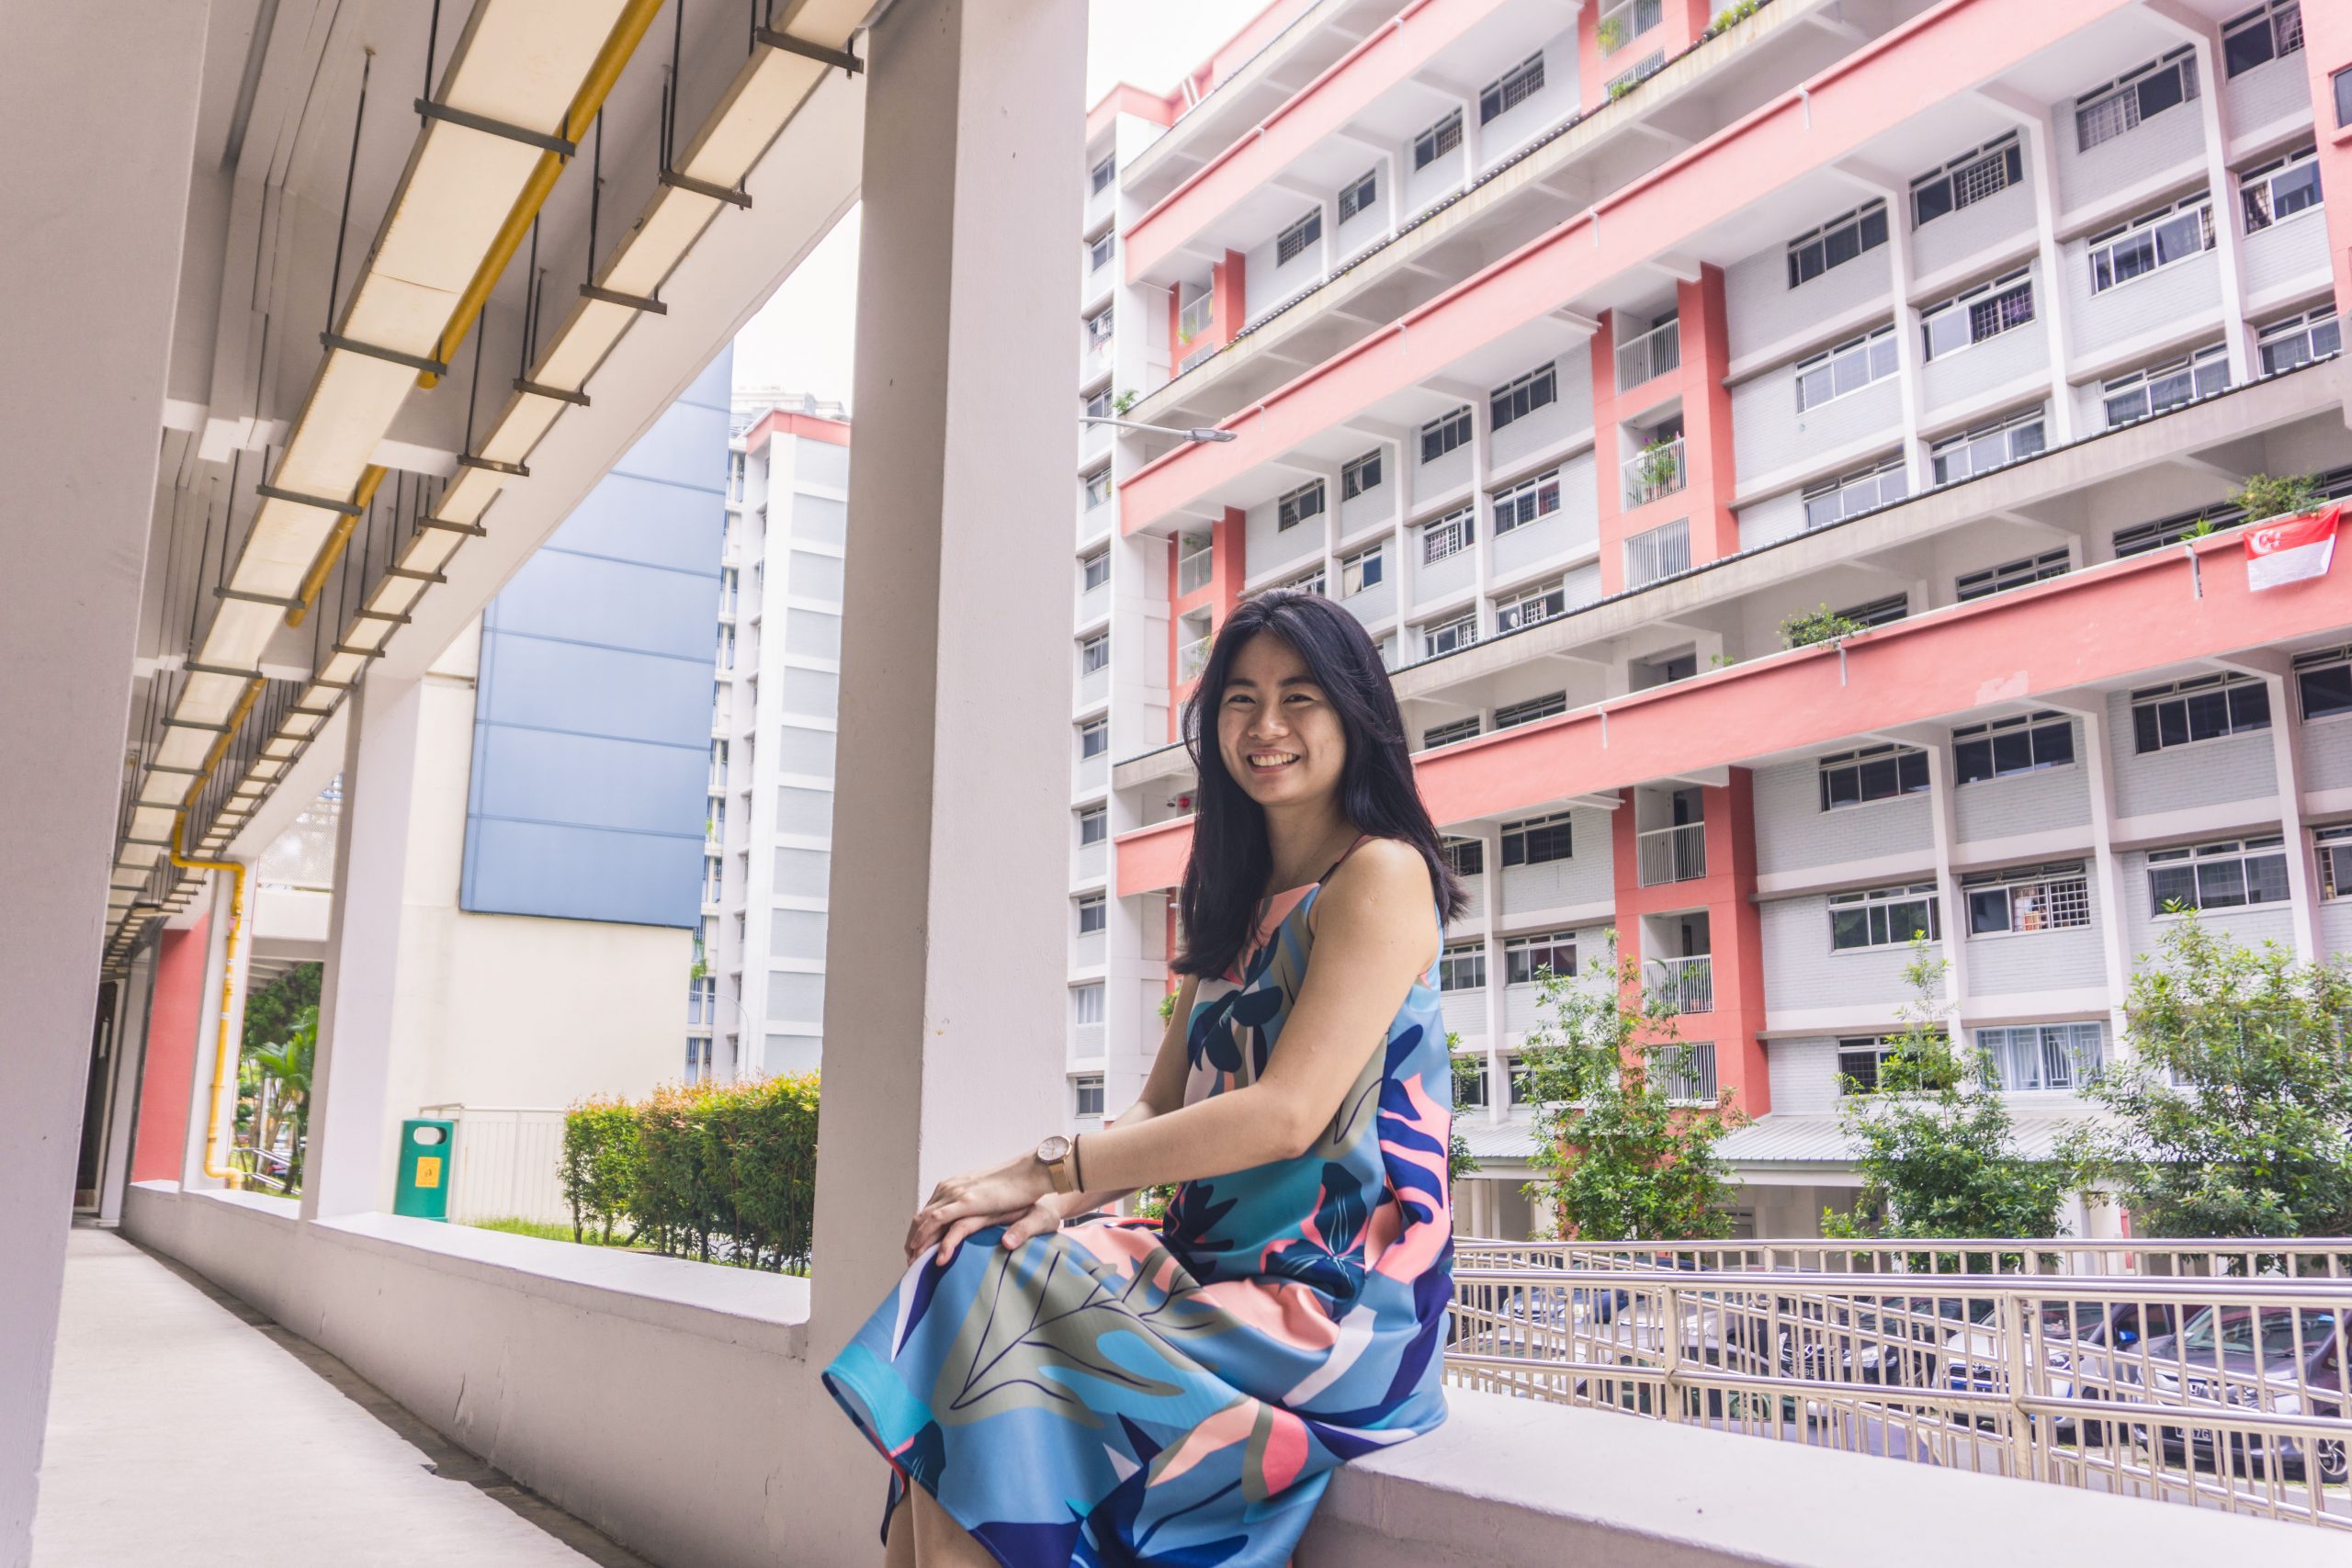 Seow Yin at her block in Woodlands